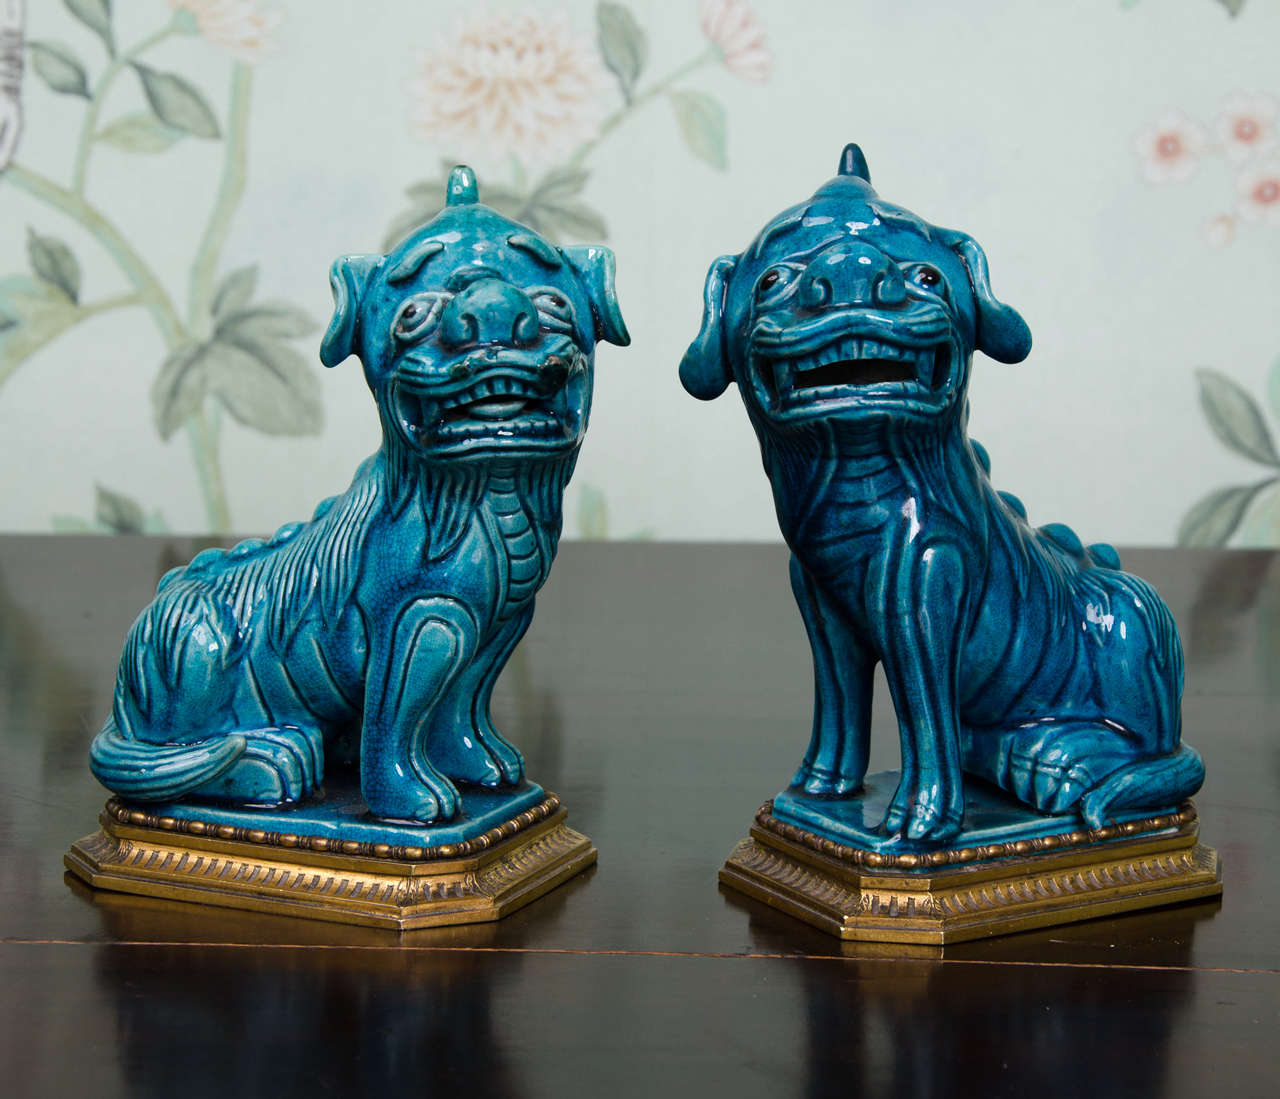 A fine and rare pair of Kangxi style Chinese turquoise glazed foo dogs on ormolu metal mounts. Both dogs are covered in a rich lustrous turquoise (peacock blue) glaze darkening which pools in the recesses. Both dogs date from the late 18th or early